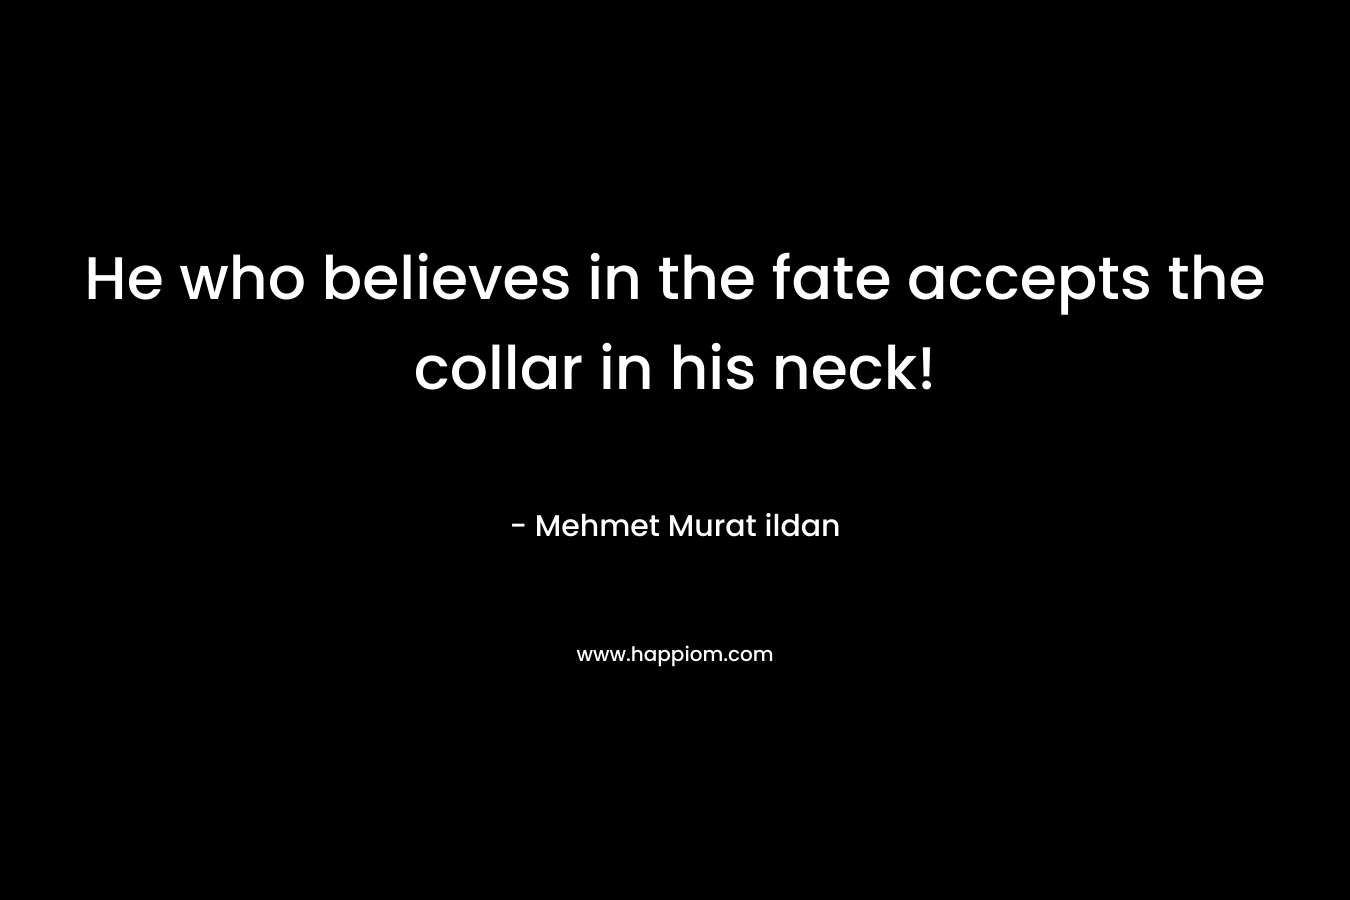 He who believes in the fate accepts the collar in his neck!